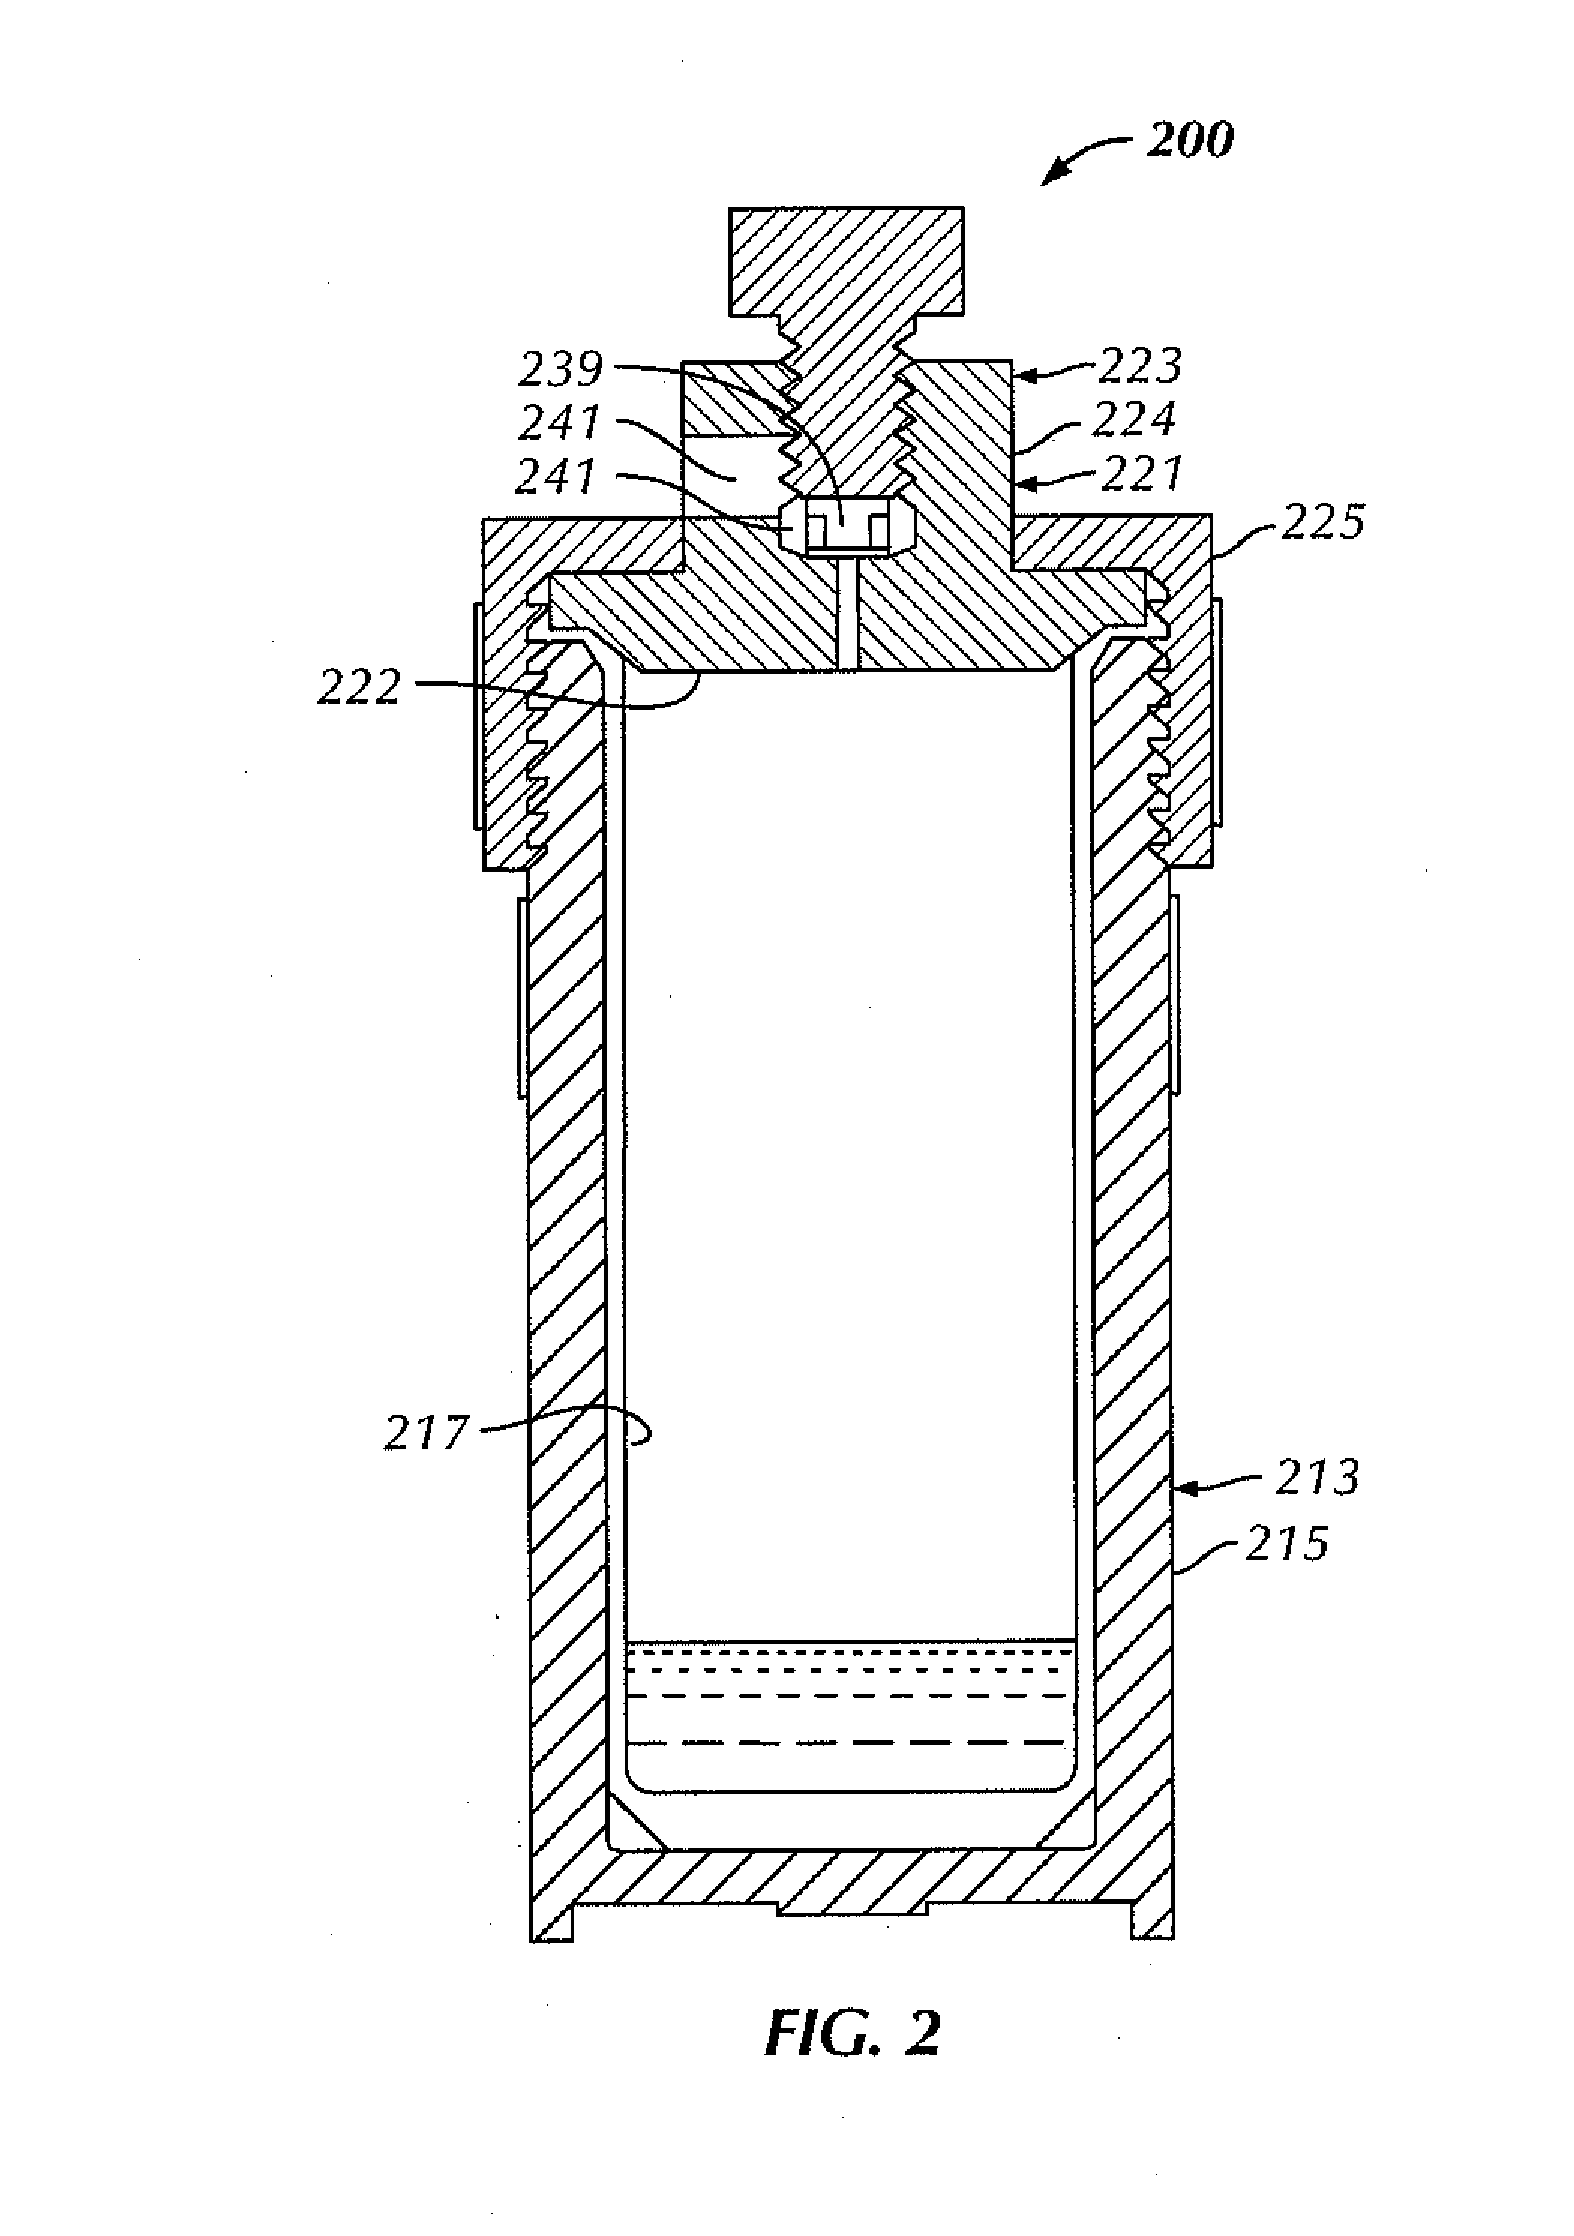 Manufacture of thermally stable cutting elements